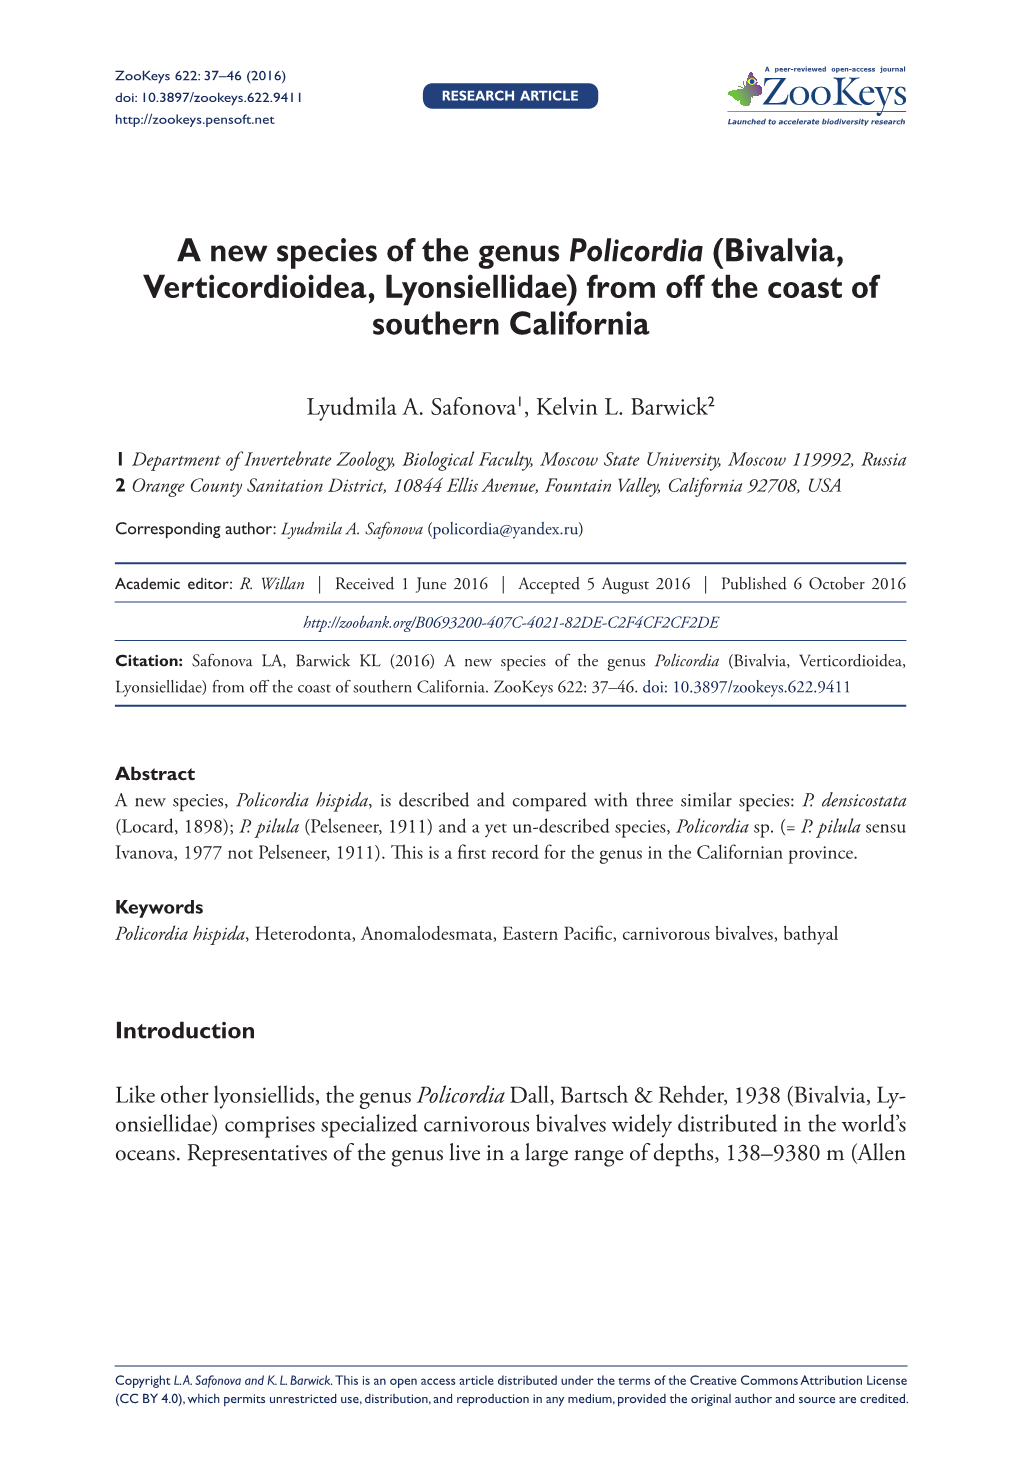 A New Species of the Genus Policordia (Bivalvia, Verticordioidea, Lyonsiellidae) from Off the Coast of Southern California